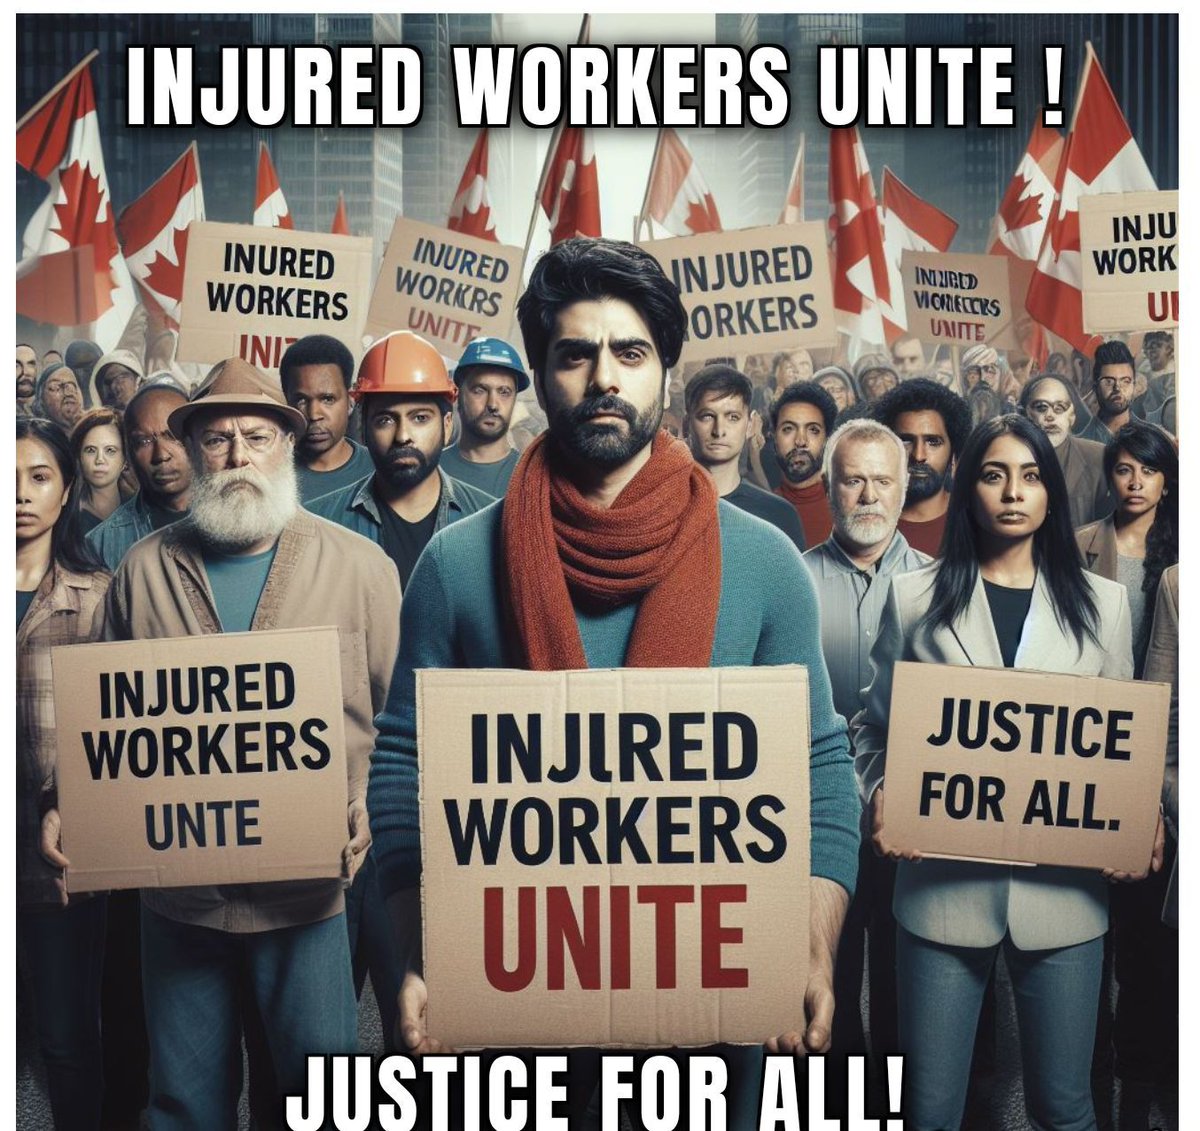 Injured workers, Allies, Advocates Unite!  Justice for all! 
Together, we stand stronger. 
Let's raise our voices and fight for the rights and support we ALL deserve. #InjuredWorkers #JusticeForAll #WorkersRights